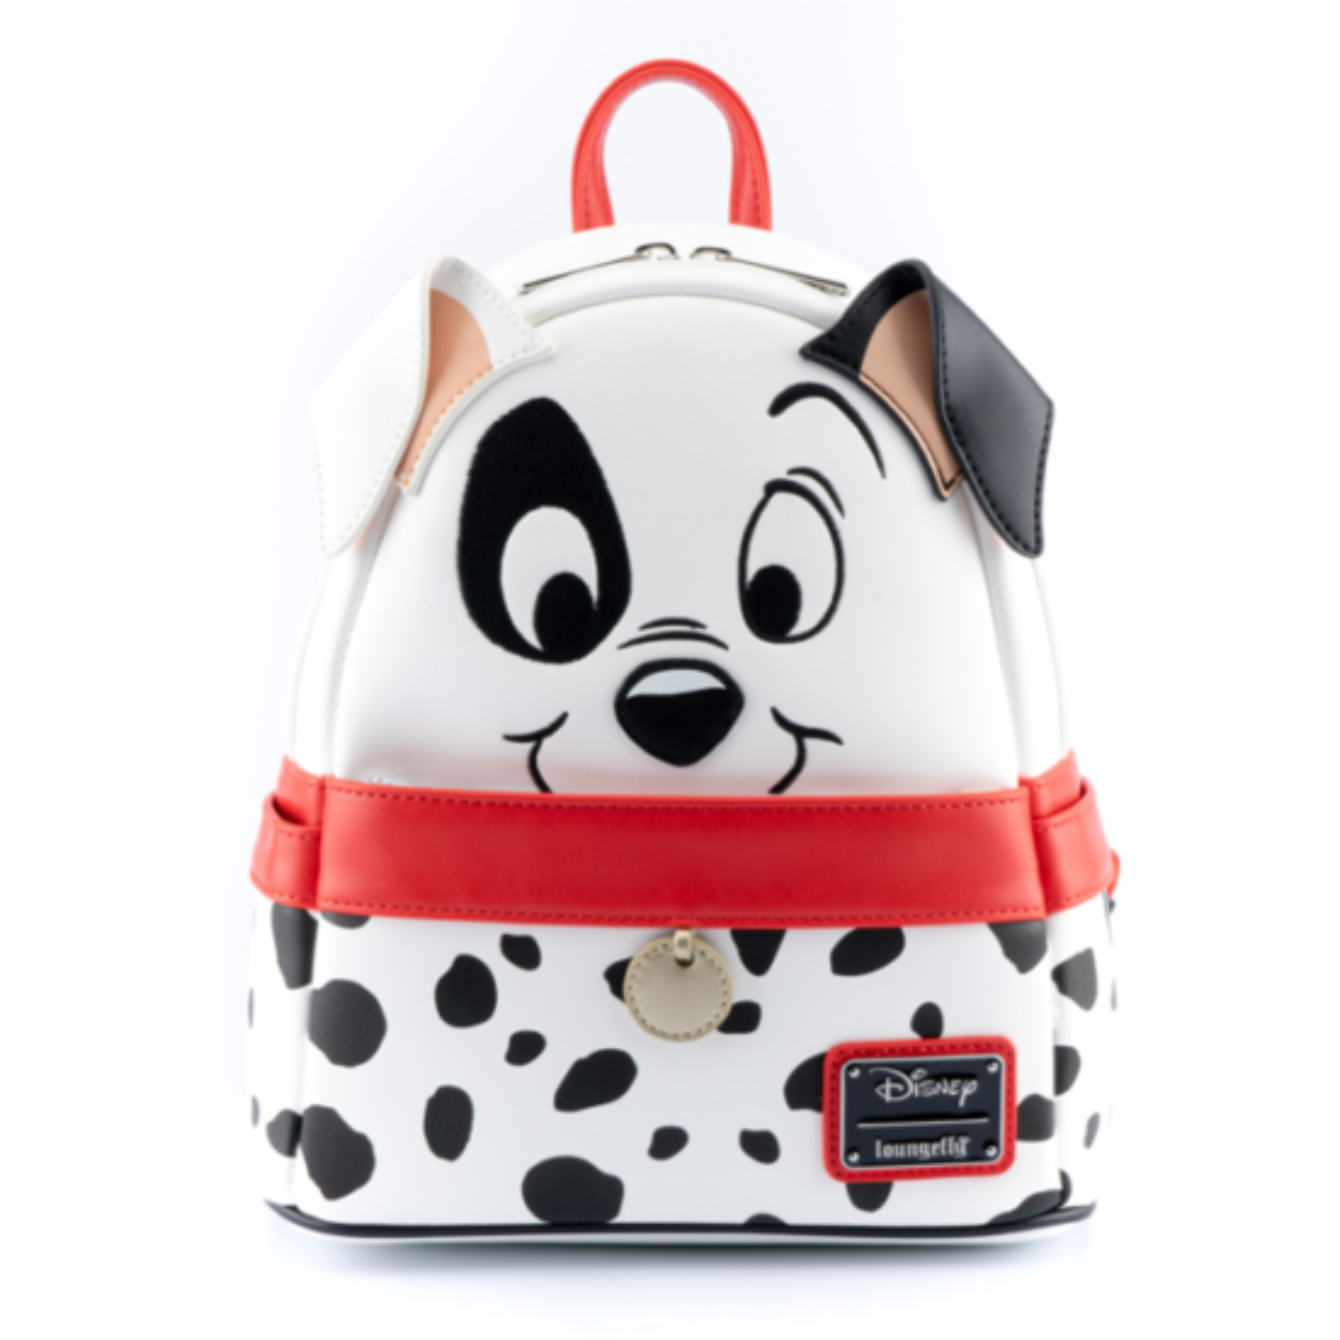 DISNEY 101 DALMATIONS 70TH ANNIVERSARY COSPLAY MINI BACKPACK LOUNGEFLY